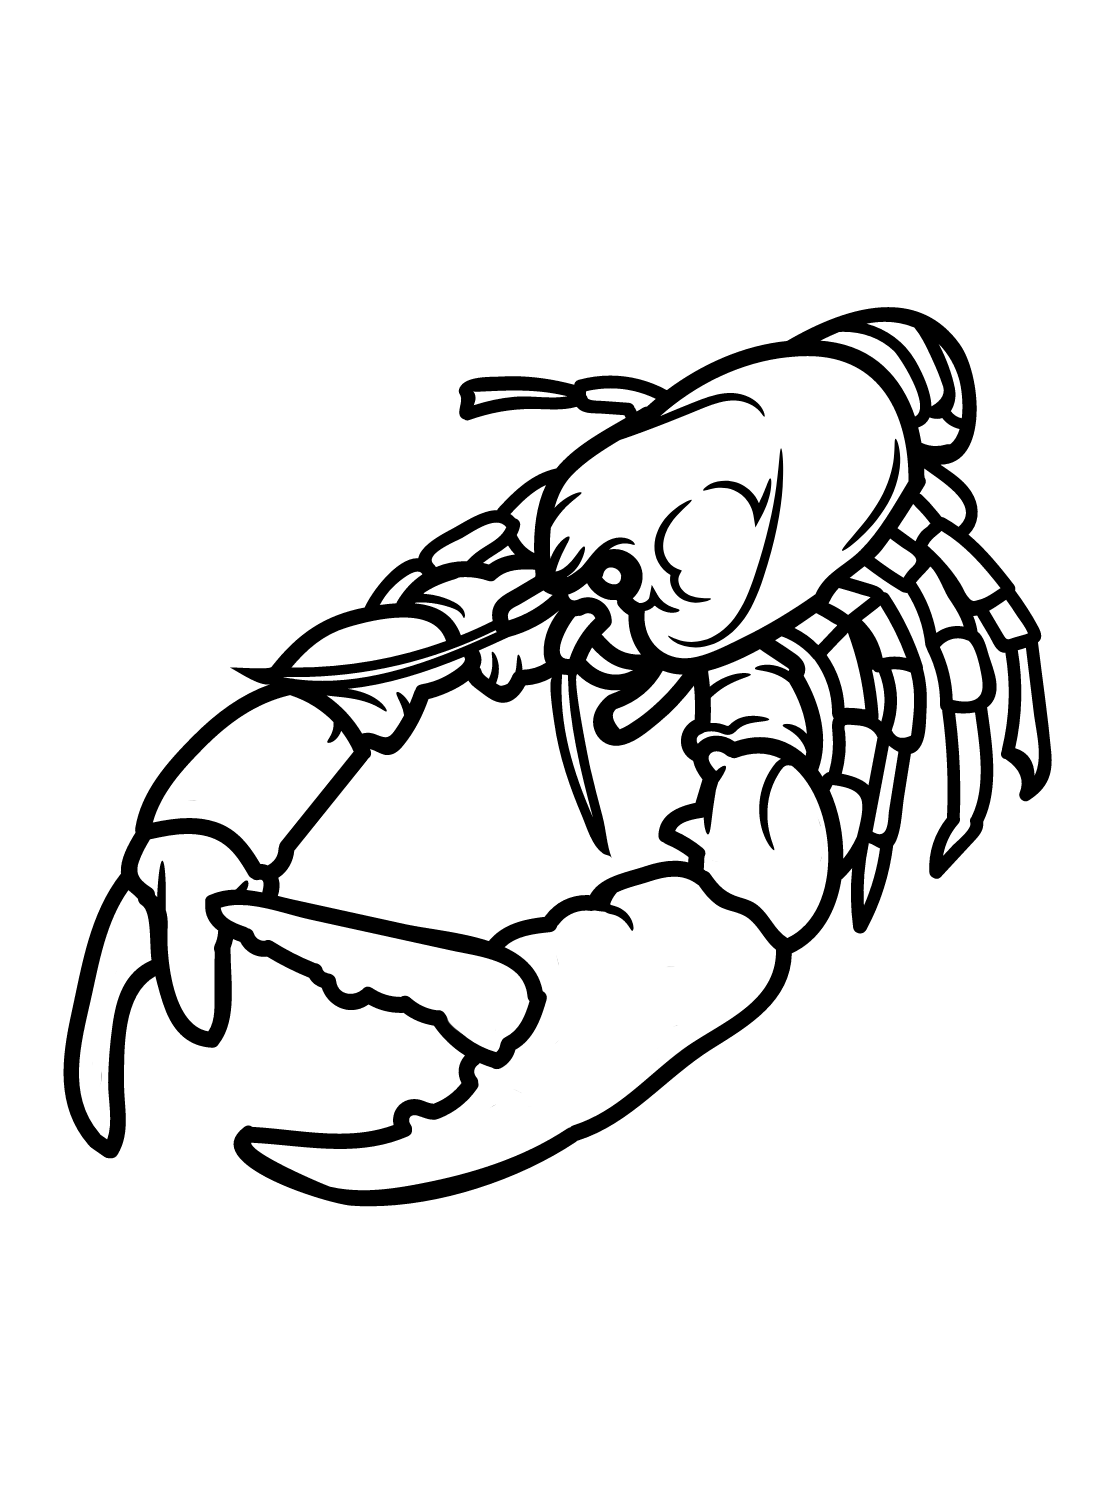 Crawfish Pictures Coloring Page